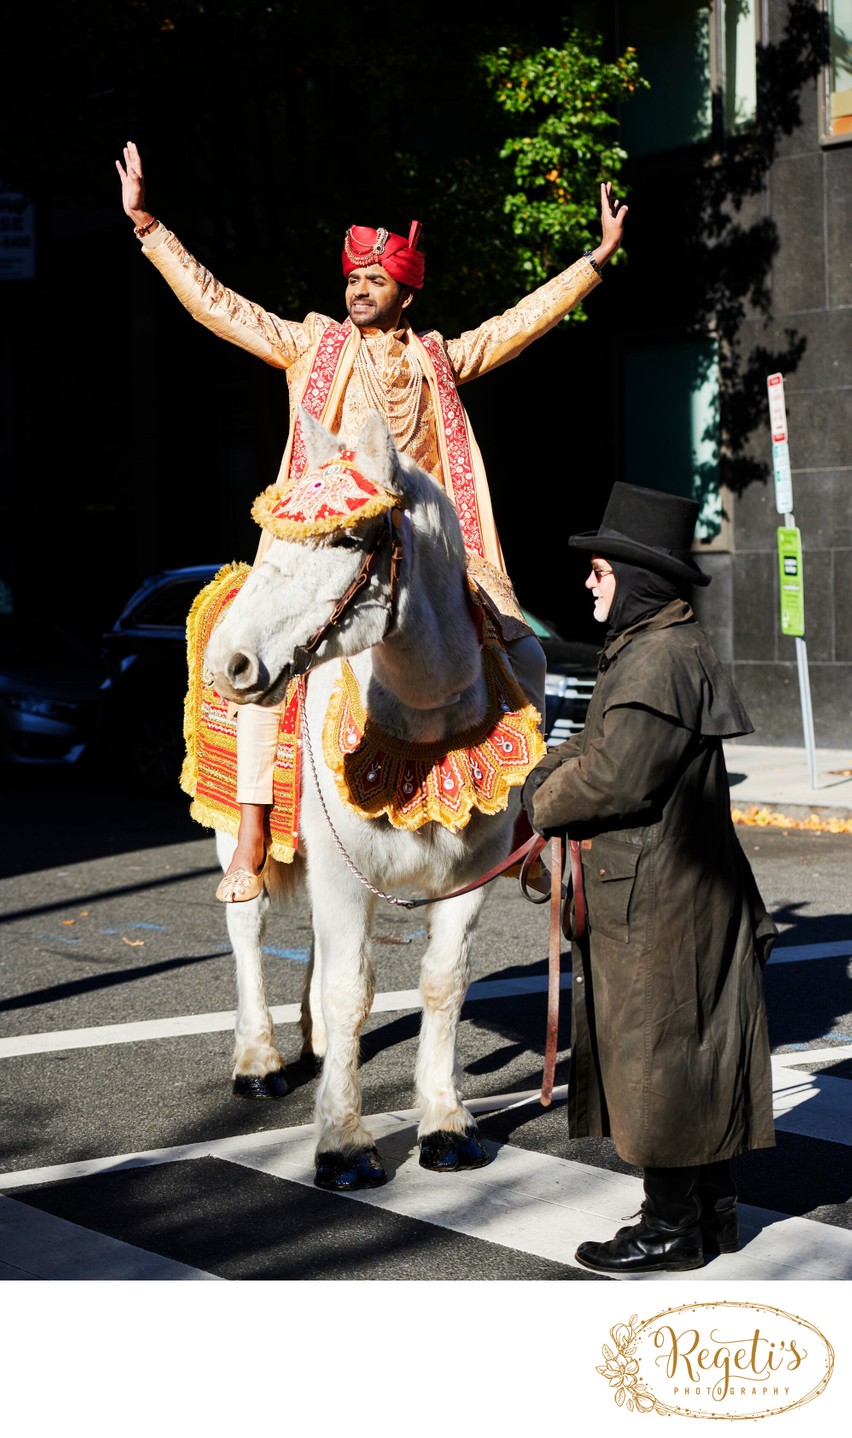 Groom and his horse ready for the Baraat